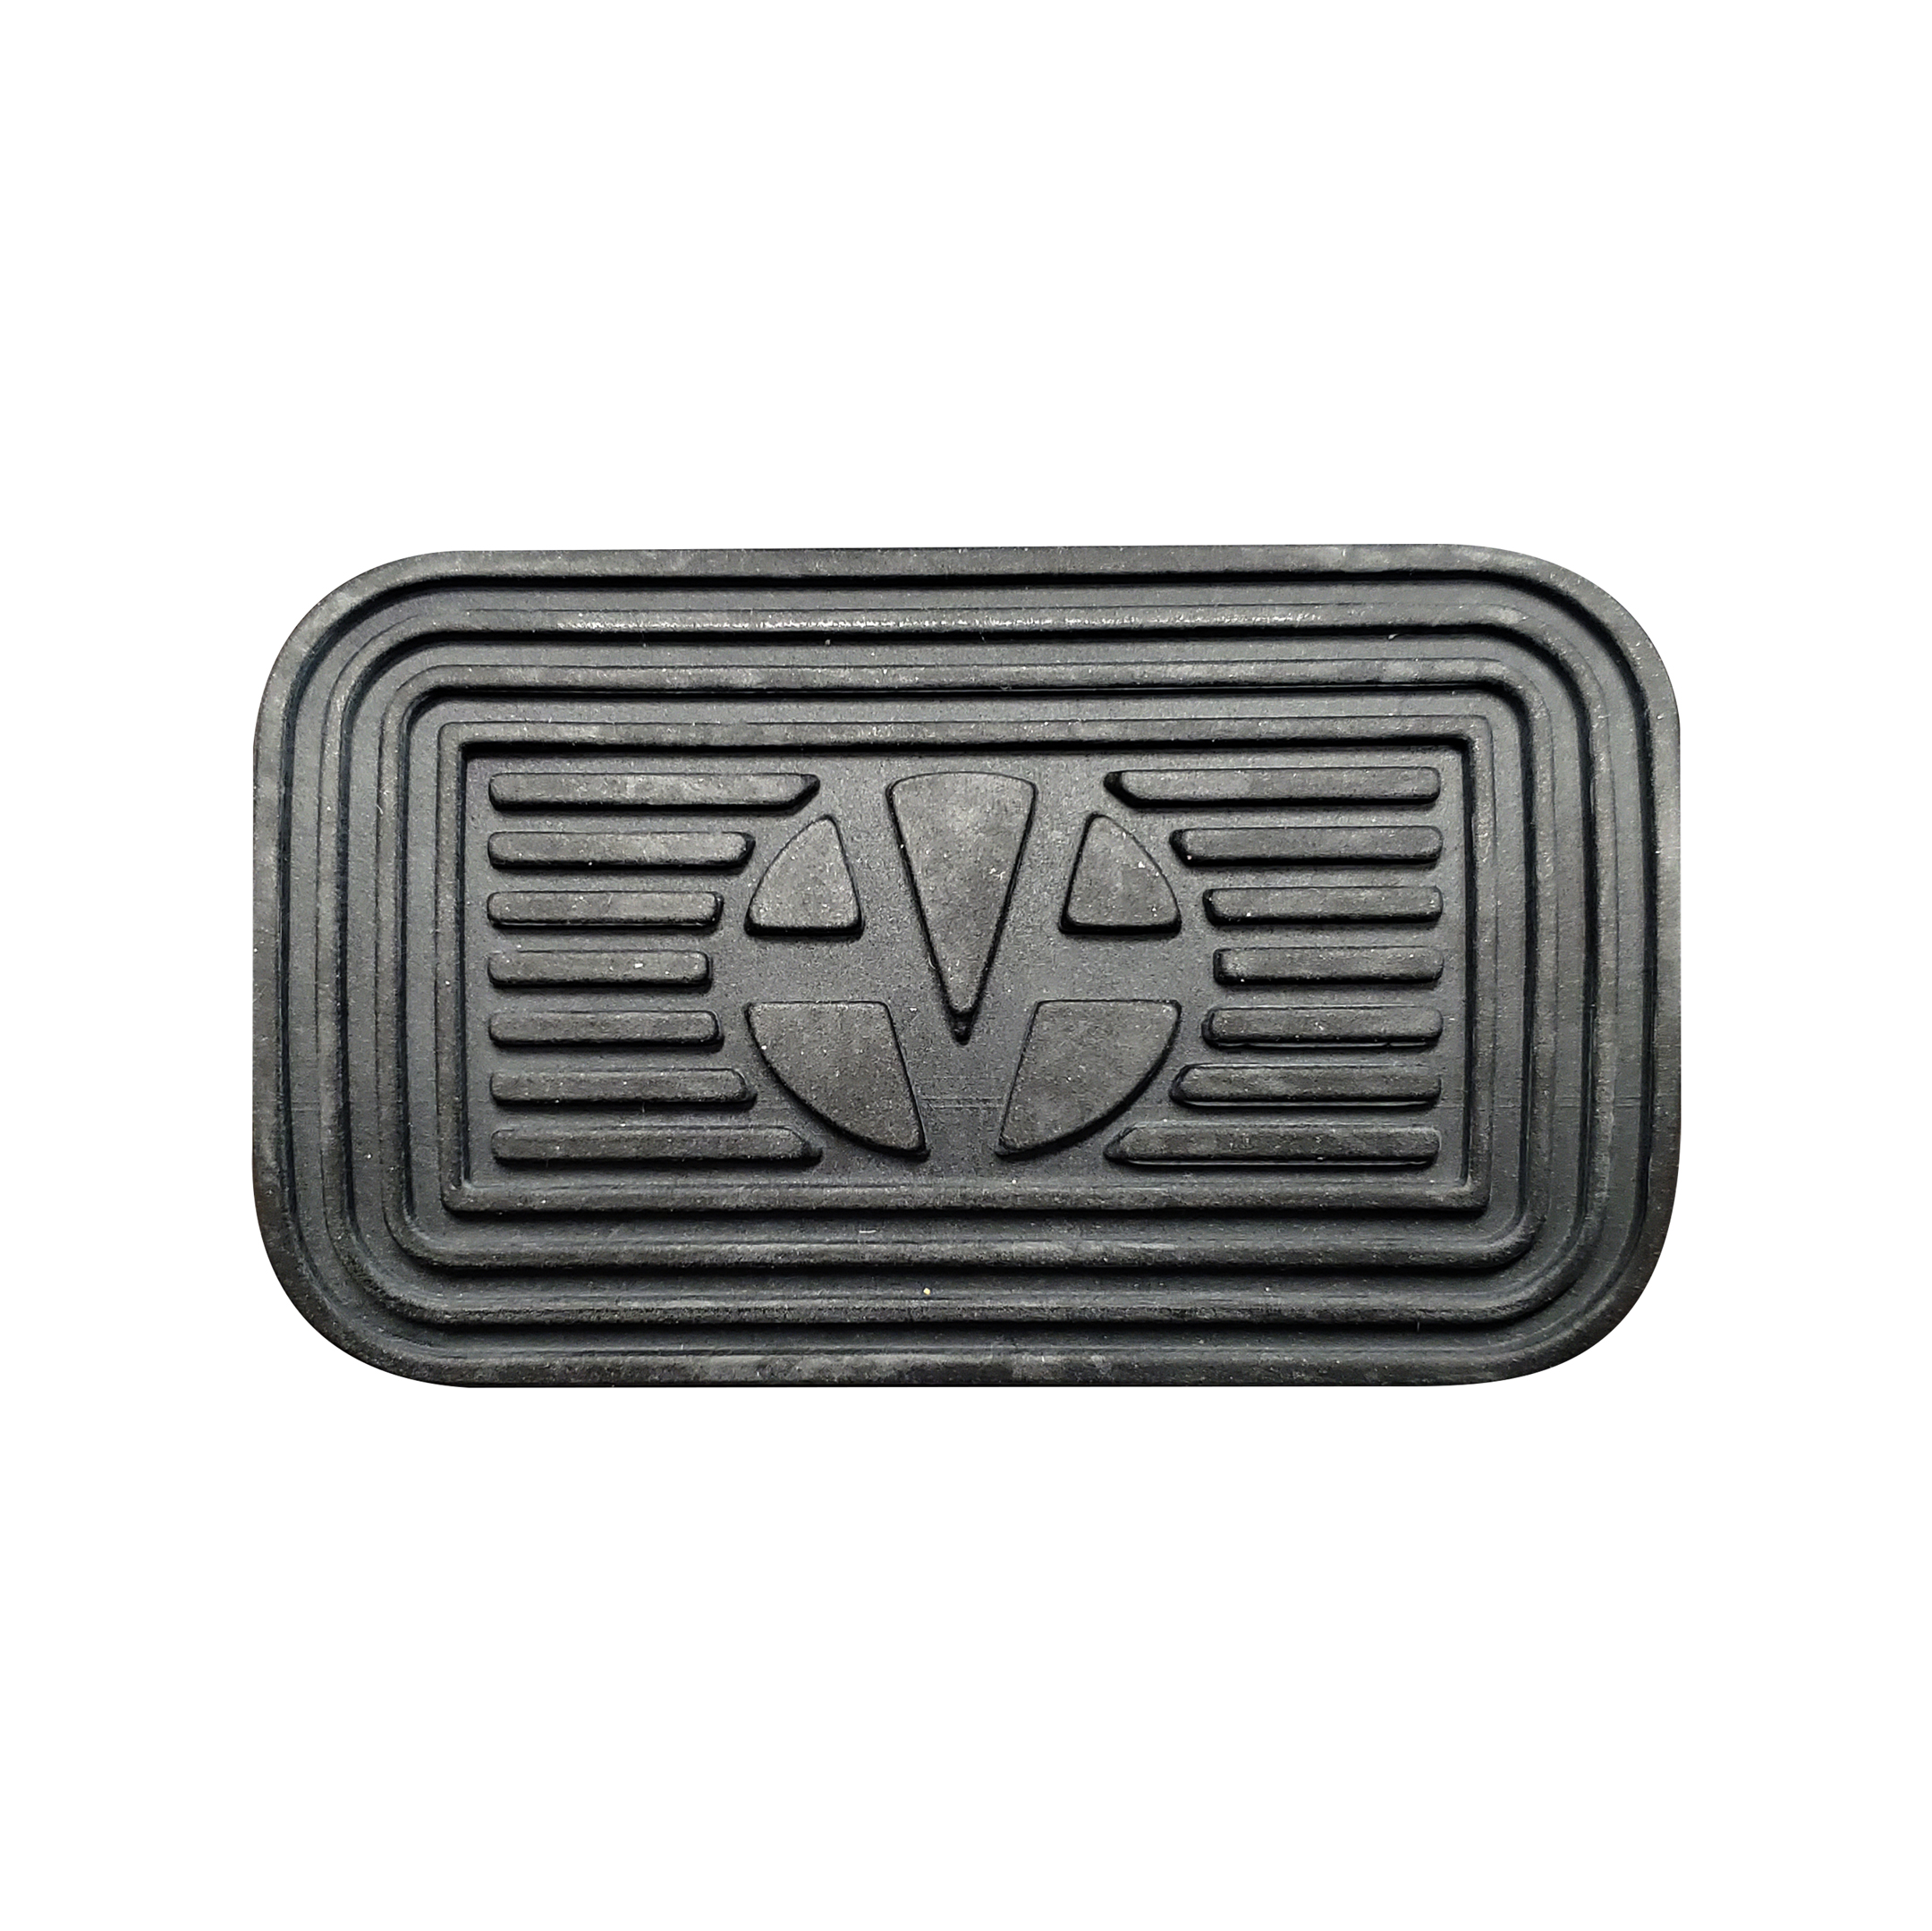 VW Volkswagen Foot Rubber Clutch or Brake Pedal Pad Cover (Pad Only) 